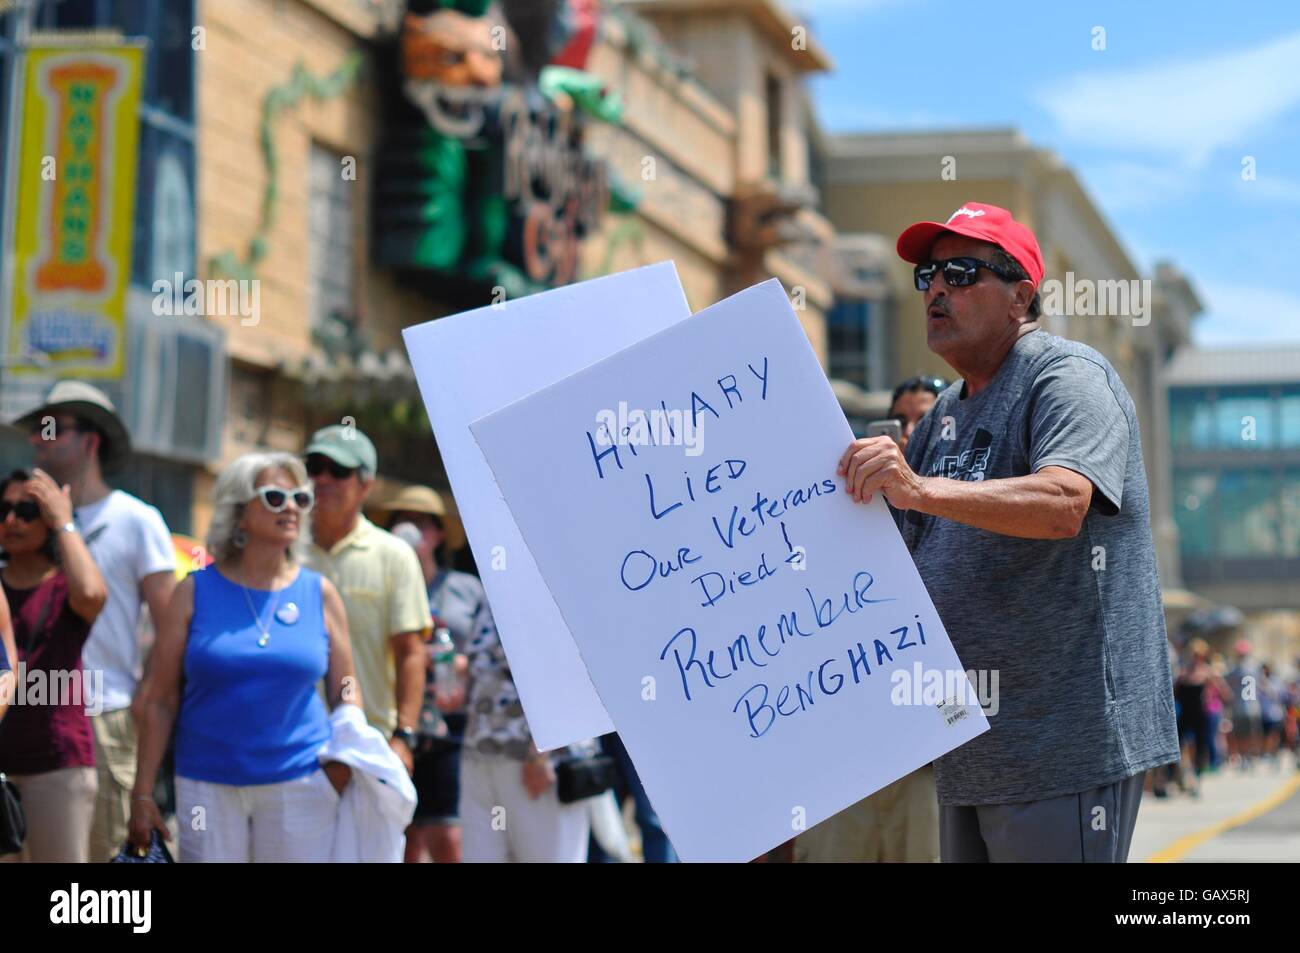 Atlantic City, New Jersey, USA. 6th July, 2016. A Trump supporter attends a July 7th, 2016 campaign stop of Hillary Clinton at the closed Trump Plaza Casino on the Boardwalk in Atlantic City, New Jersey. © Bastiaan Slabbers/ZUMA Wire/Alamy Live News Stock Photo